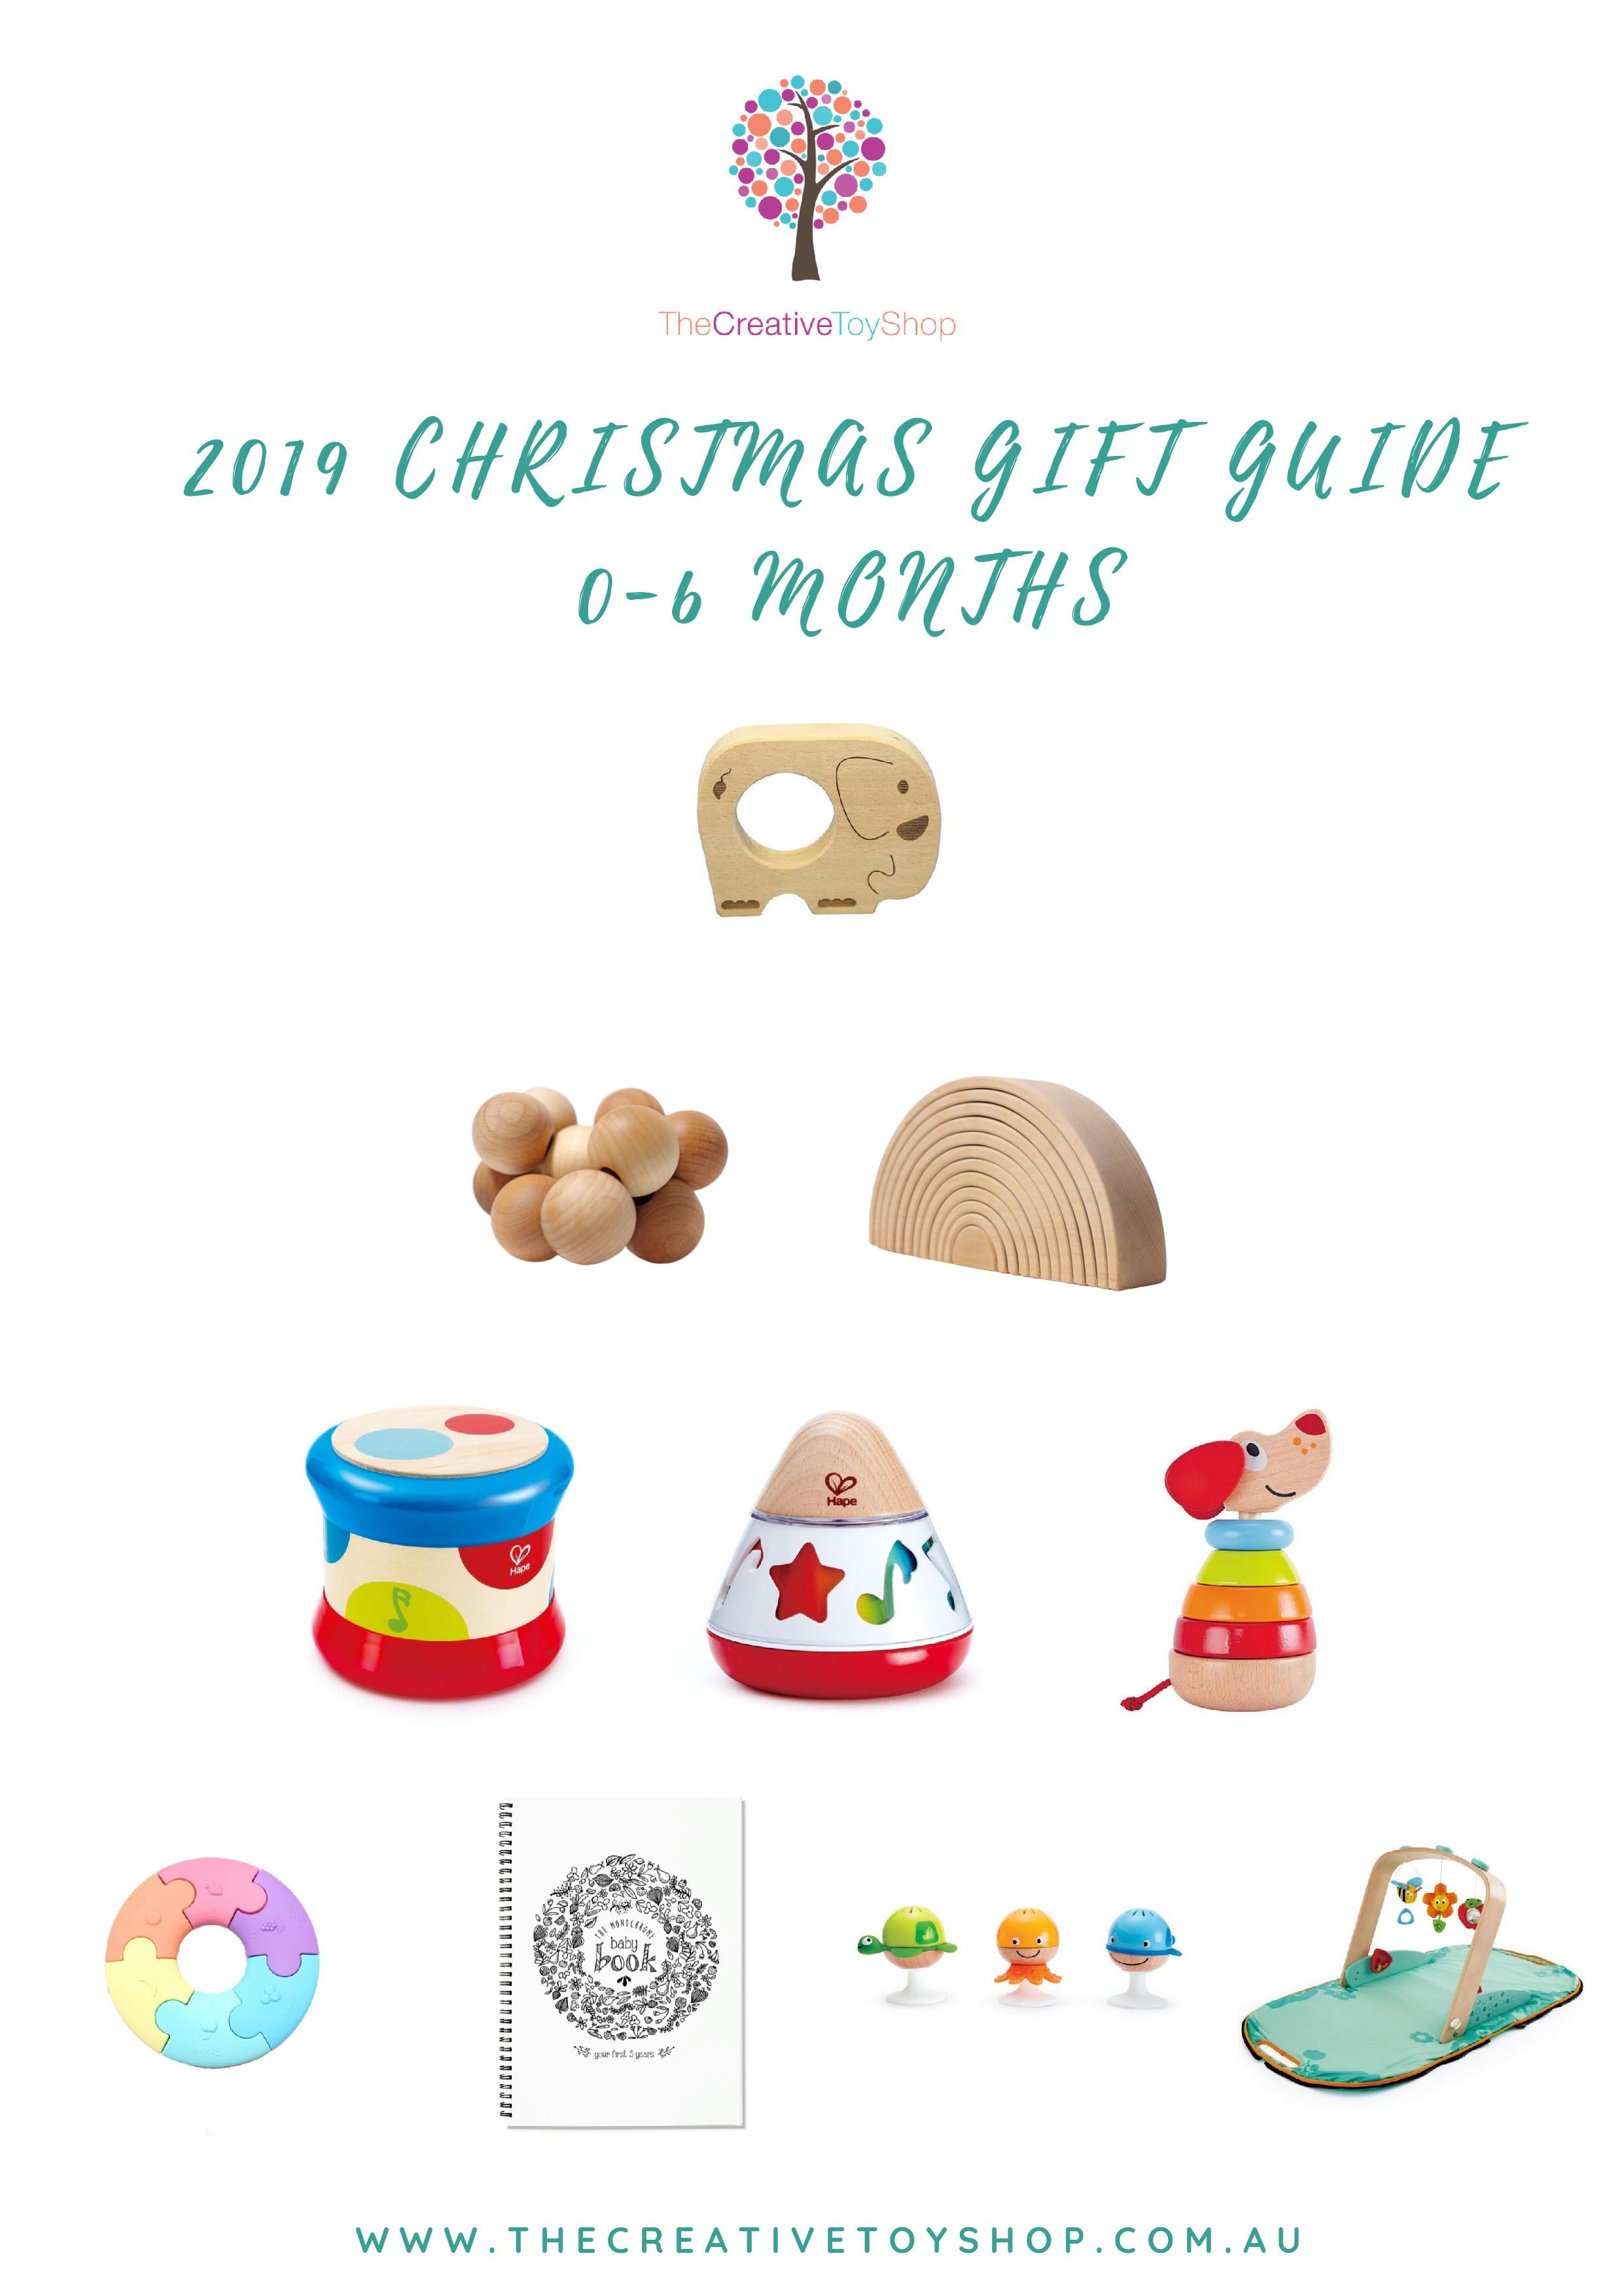 The_Creative_Toy_Shop_Christmas_Gift_Guide_0-6_months